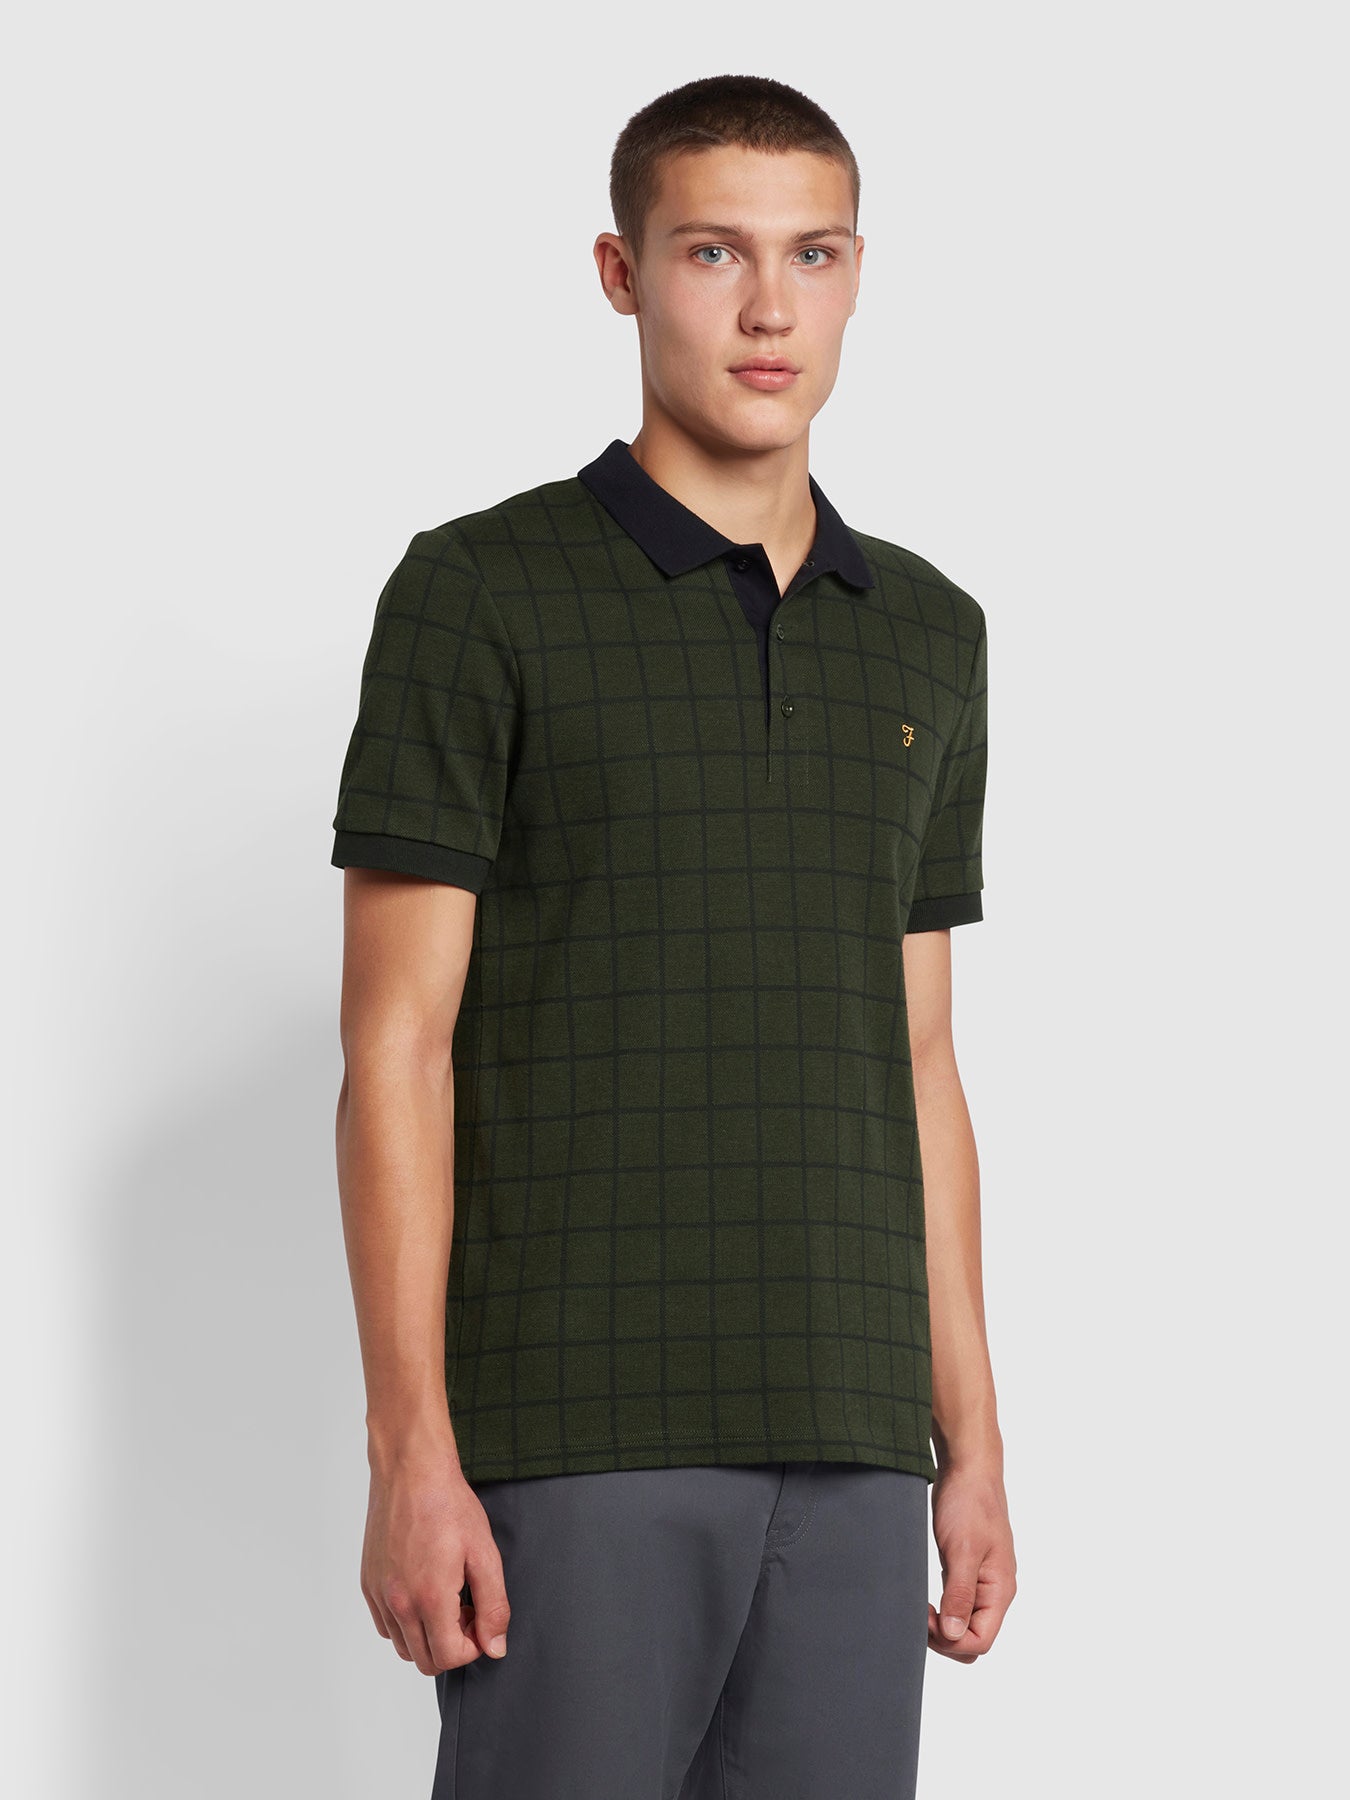 View Hunningale Slim Fit Check Organic Cotton Polo Shirt In Evergreen information